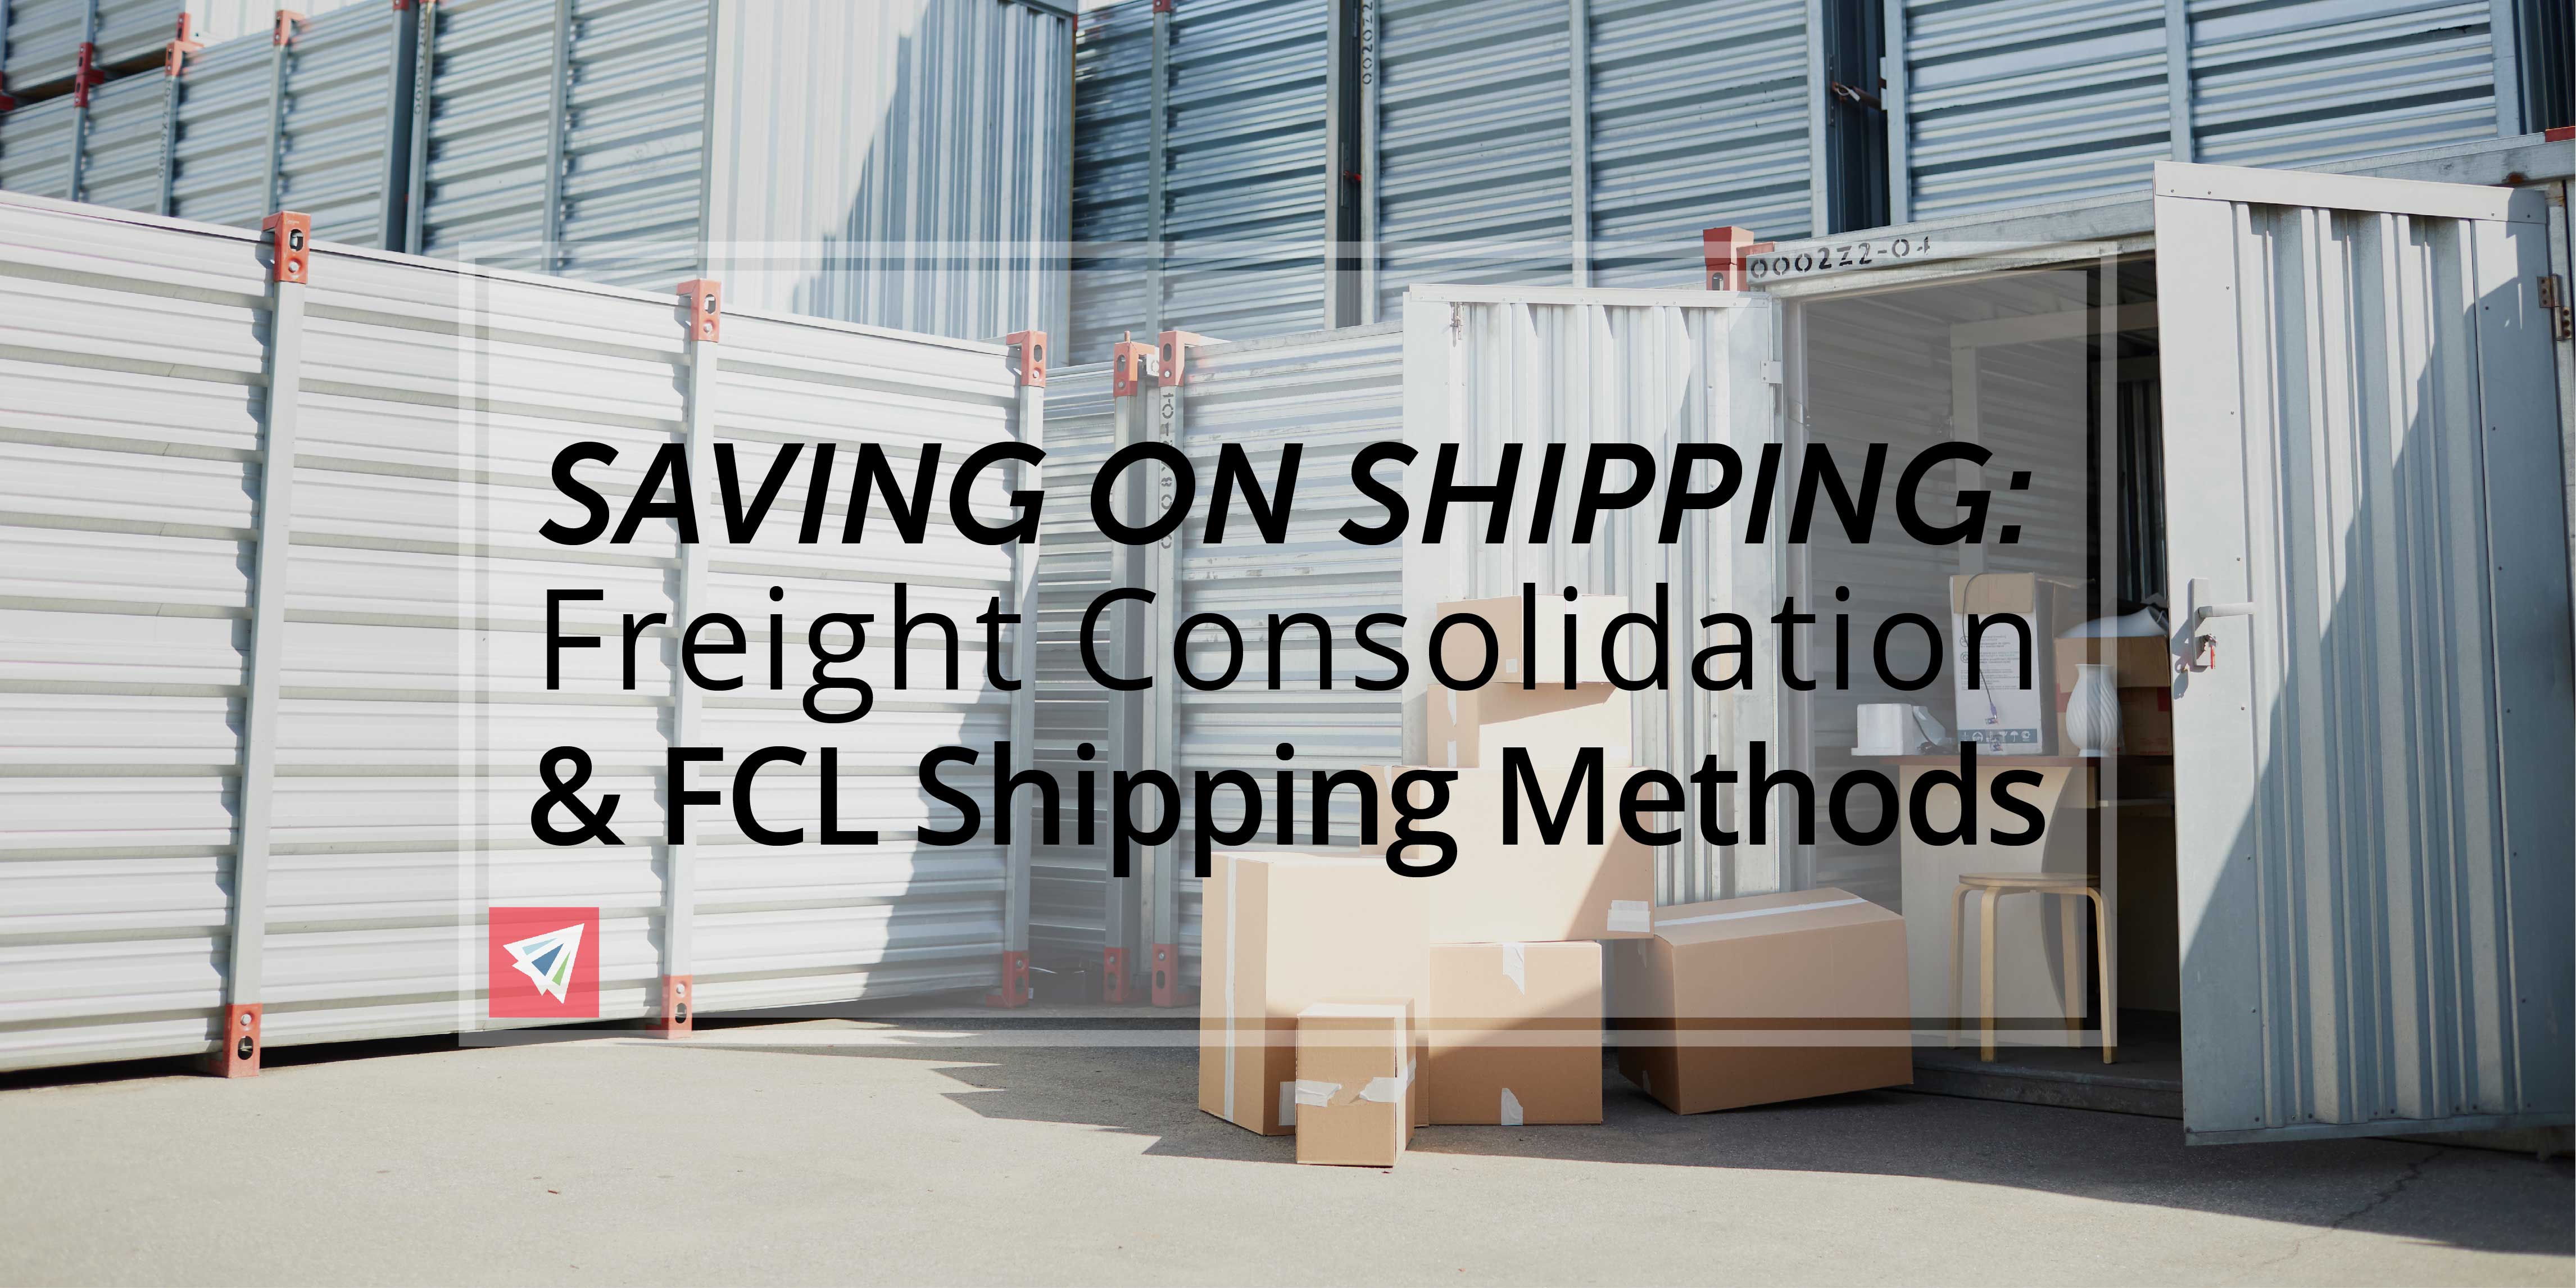 Saving on Shipping - Freight Consolidation & FCL Shipping Methods